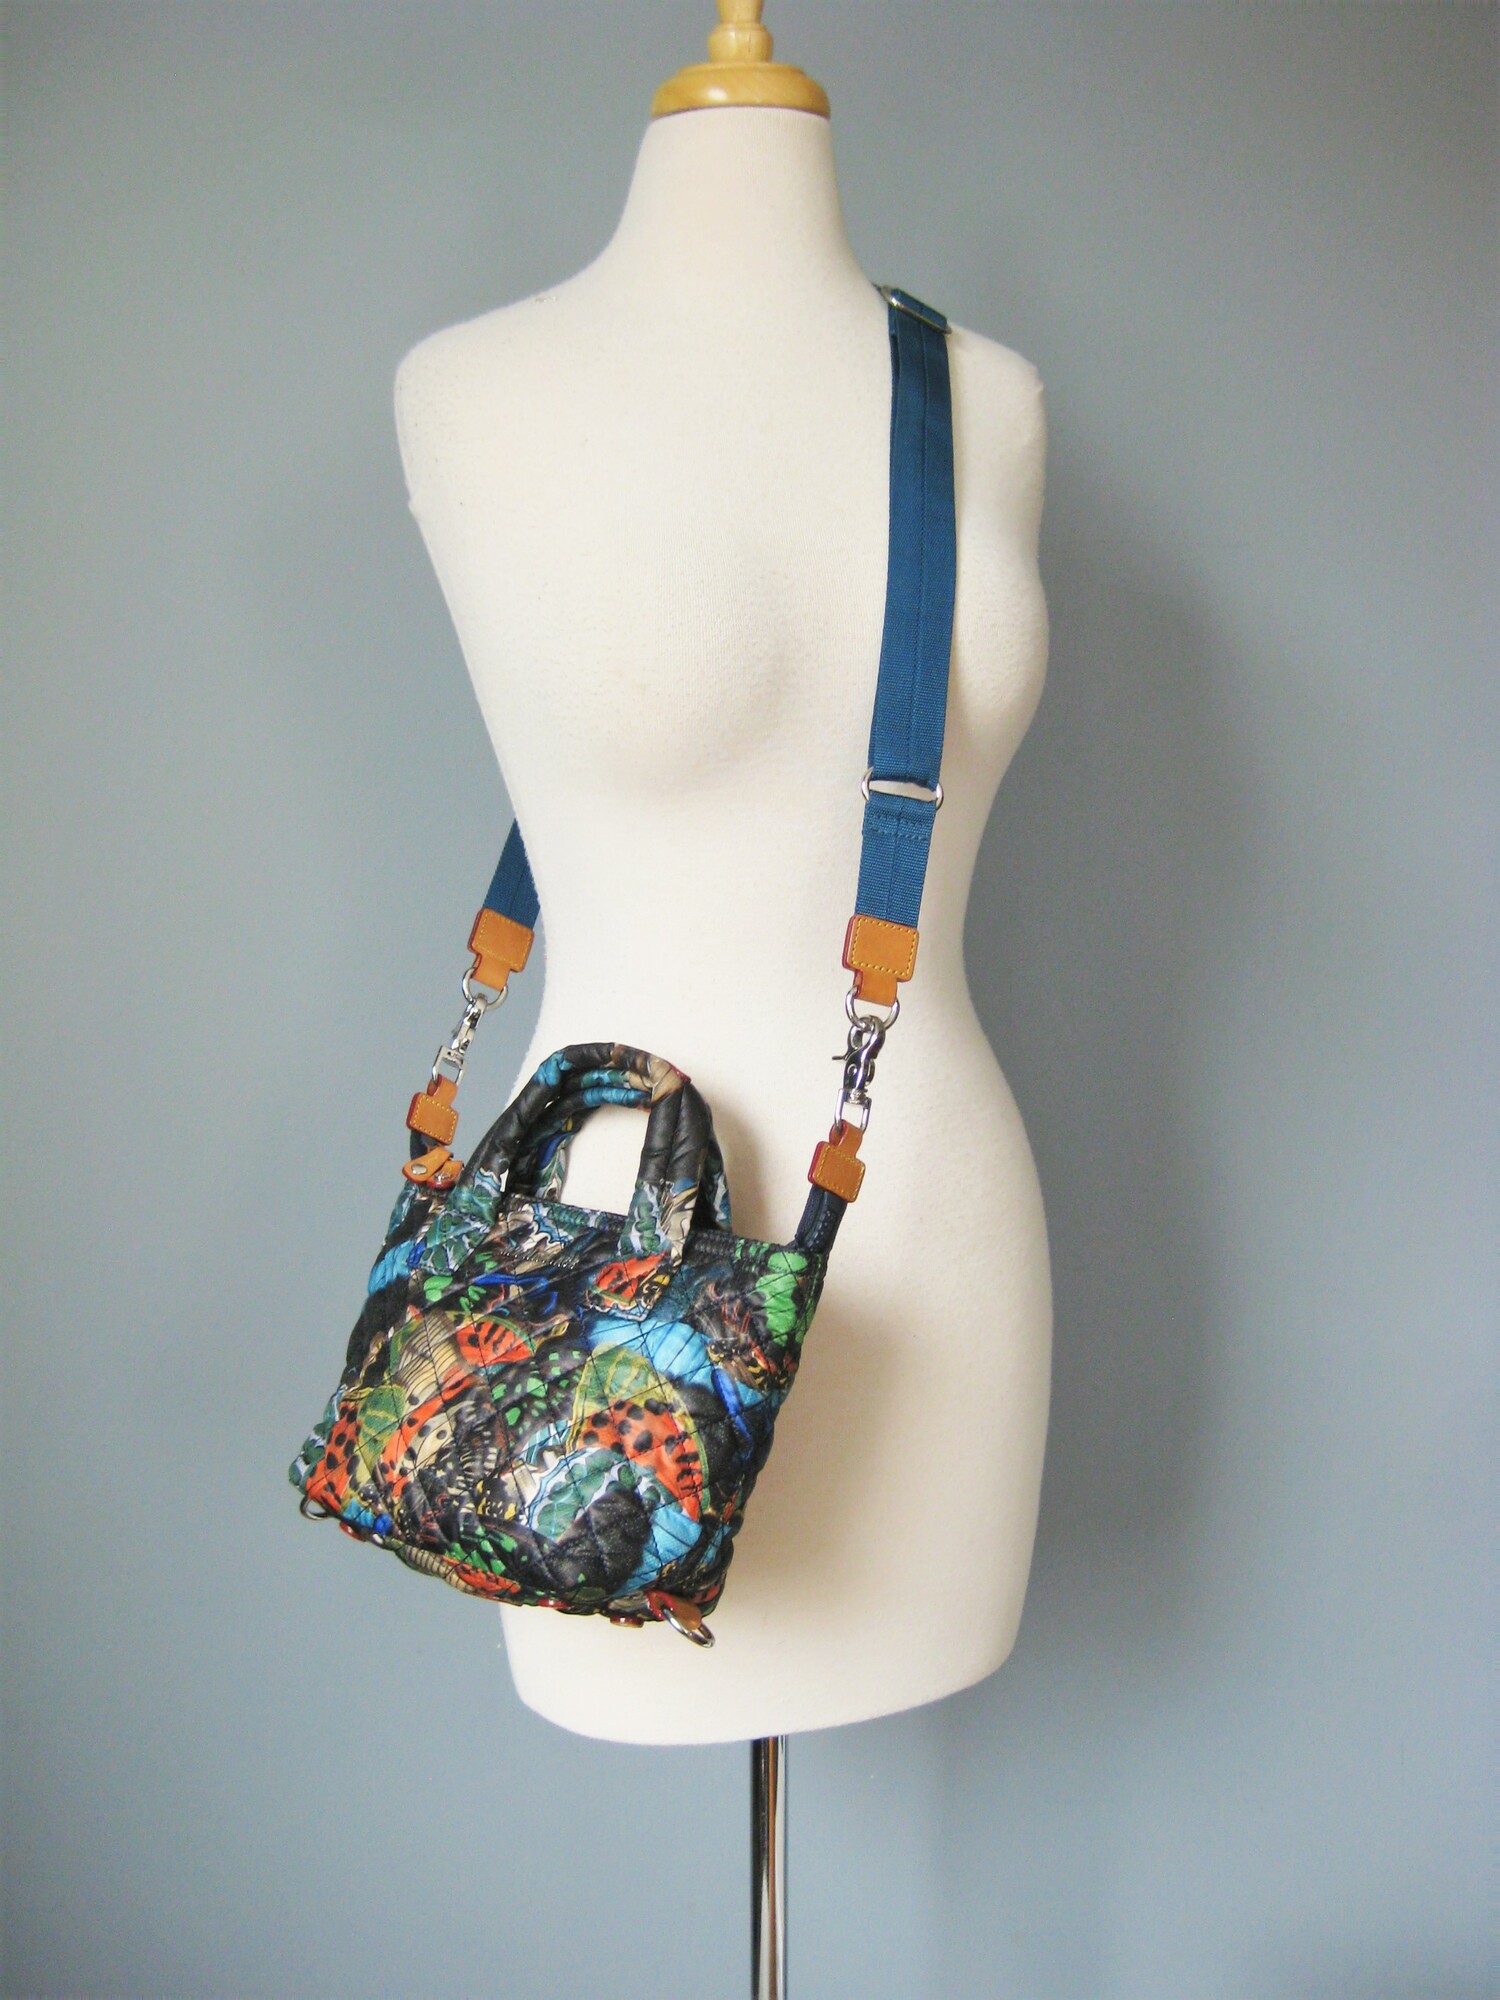 MZ Wallace Quilted Mini, Blk/mult, Size: None
rare MZ Wallace Crossbody in a blue/orange/black abstract graphic print.
smallish, perfect for travel, packable and crushable
Strong leather reinforced web strap can be removed and adjustted.
Leather trim
Silver hardware

10 x 7.25 x 3.25
Strap Drop: 16 to 26.5
handle drop: 3

perfect condition!
Thanks for looking!

#47482